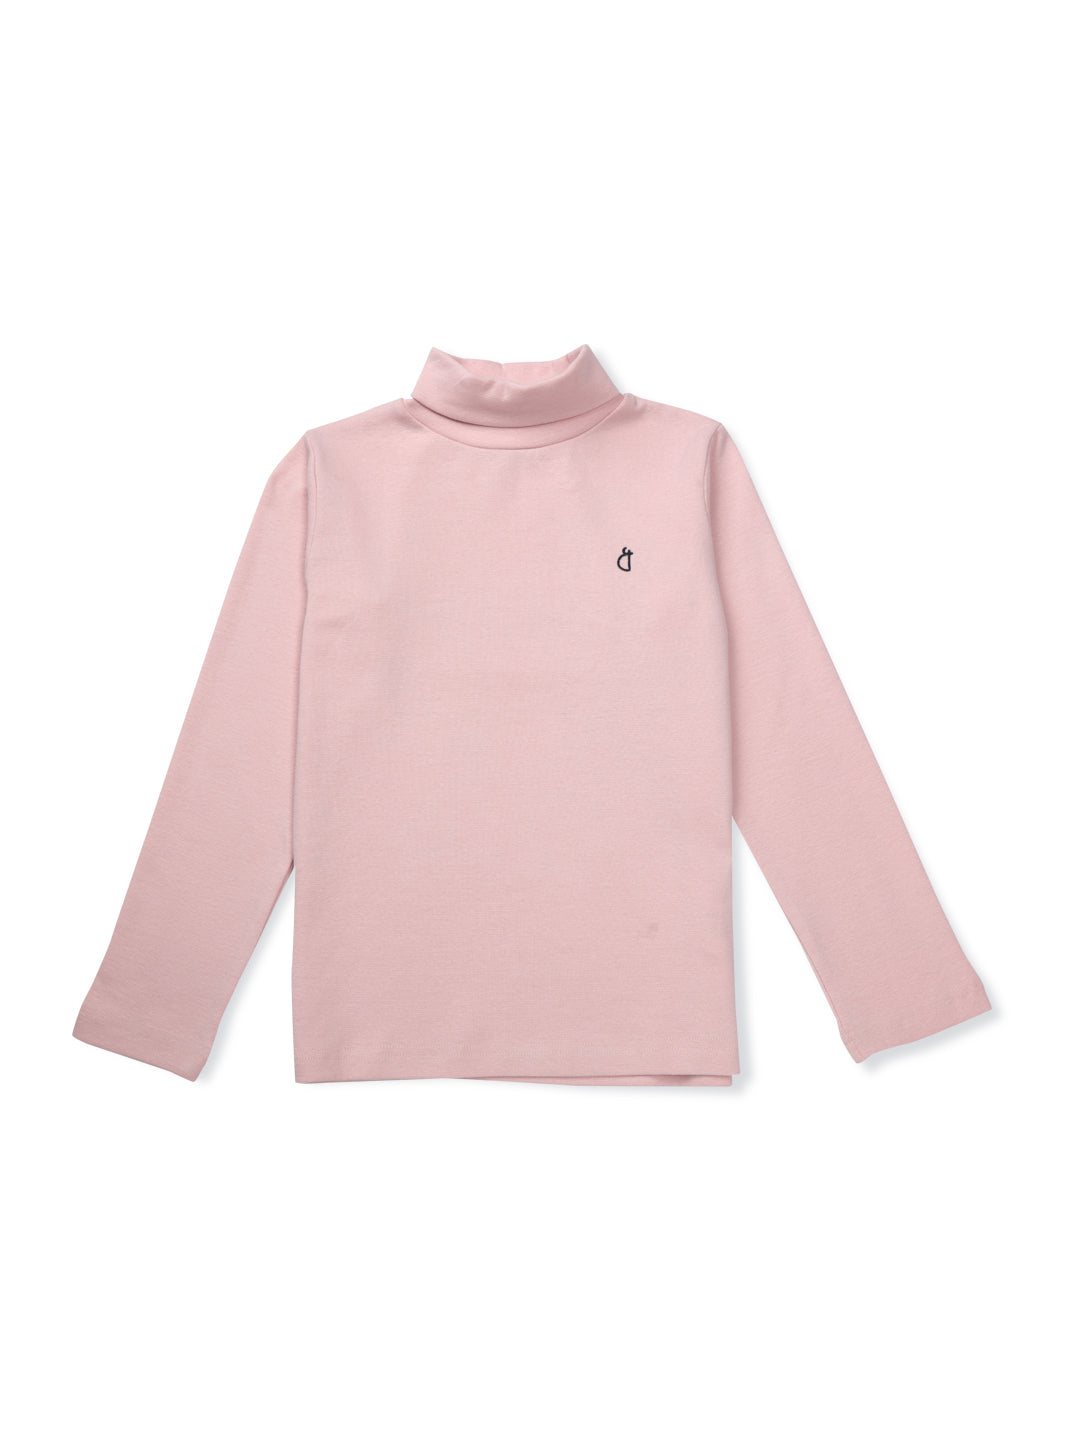 Girls Pink Solid Cotton Skivvy